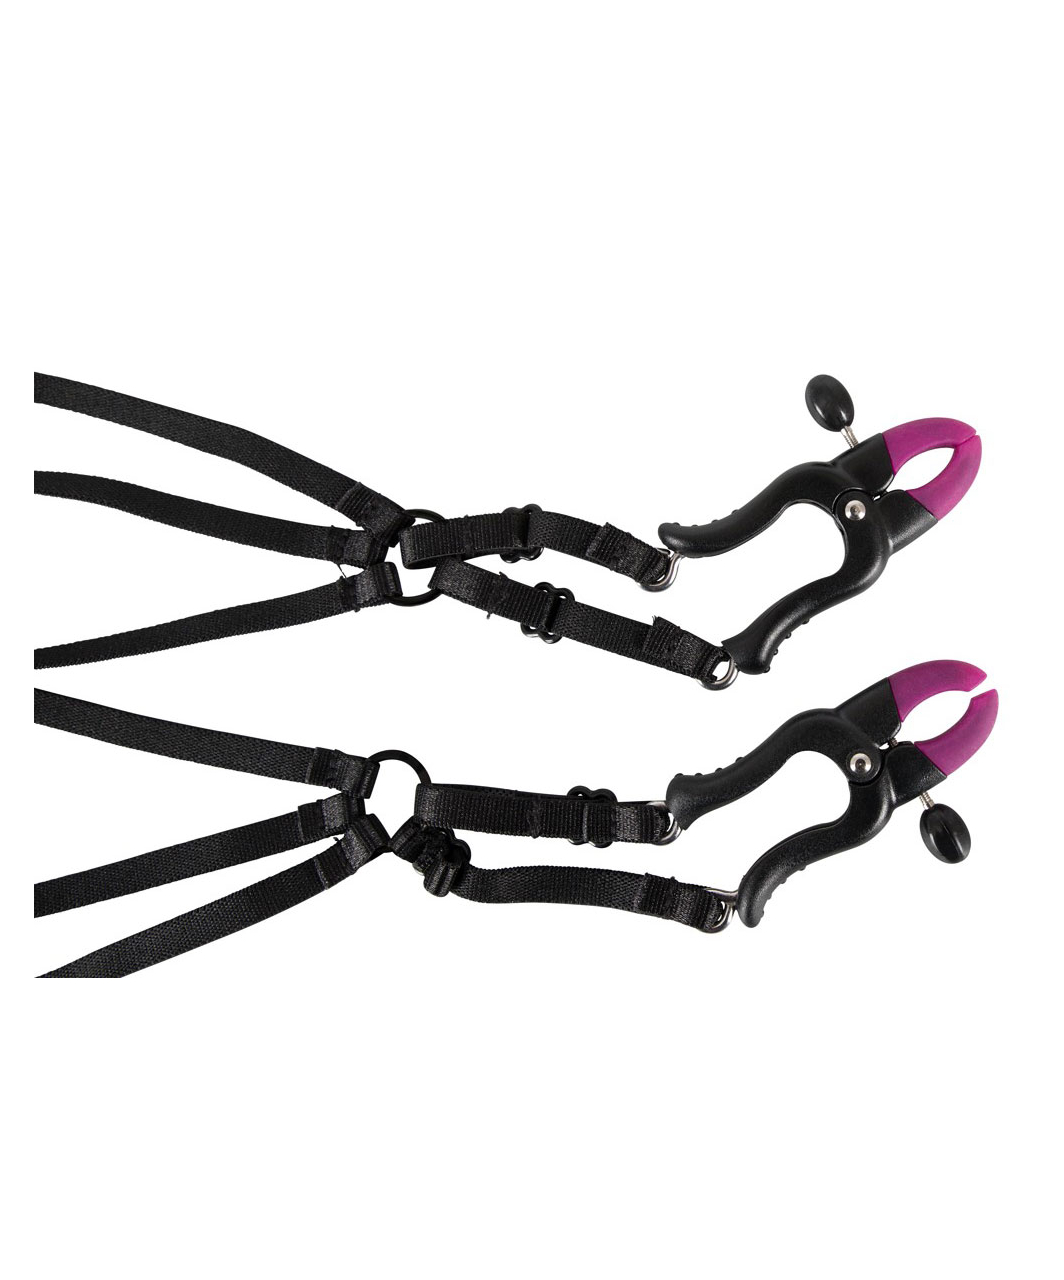 Bad Kitty strap bra with nipple clamps